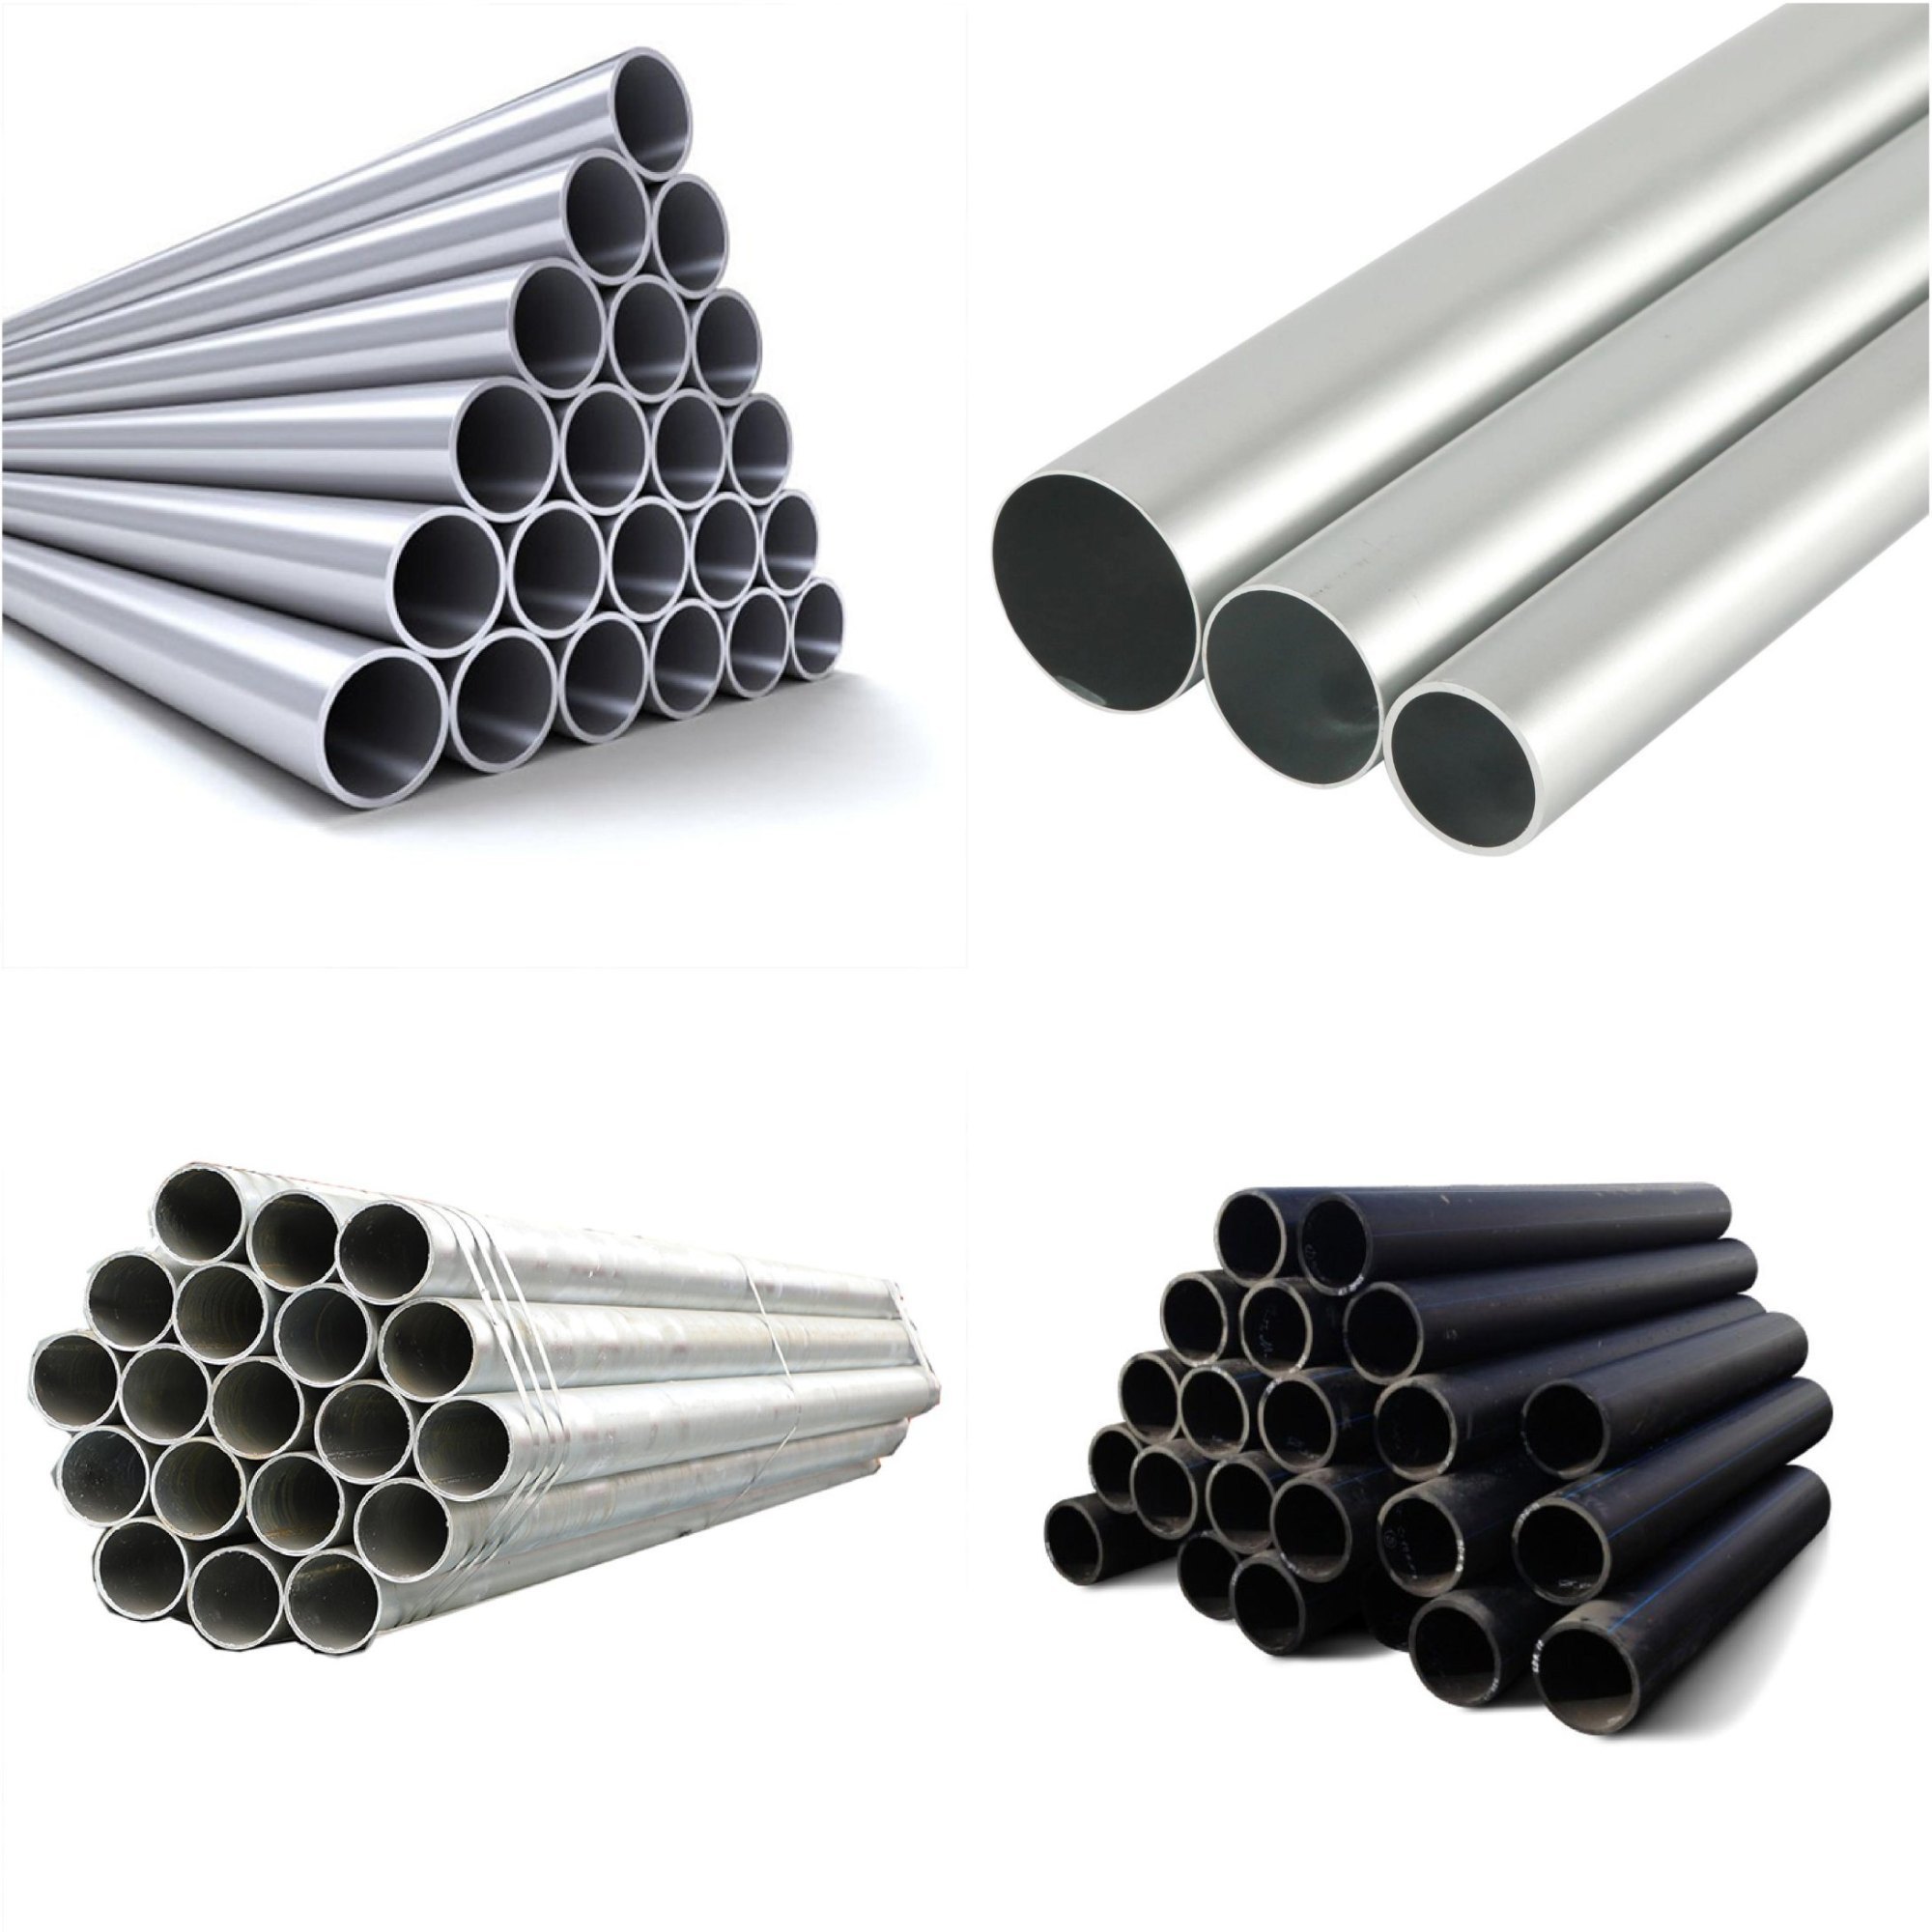 Comprehensive Guide to 904L Stainless Steel Pipe and Fittings